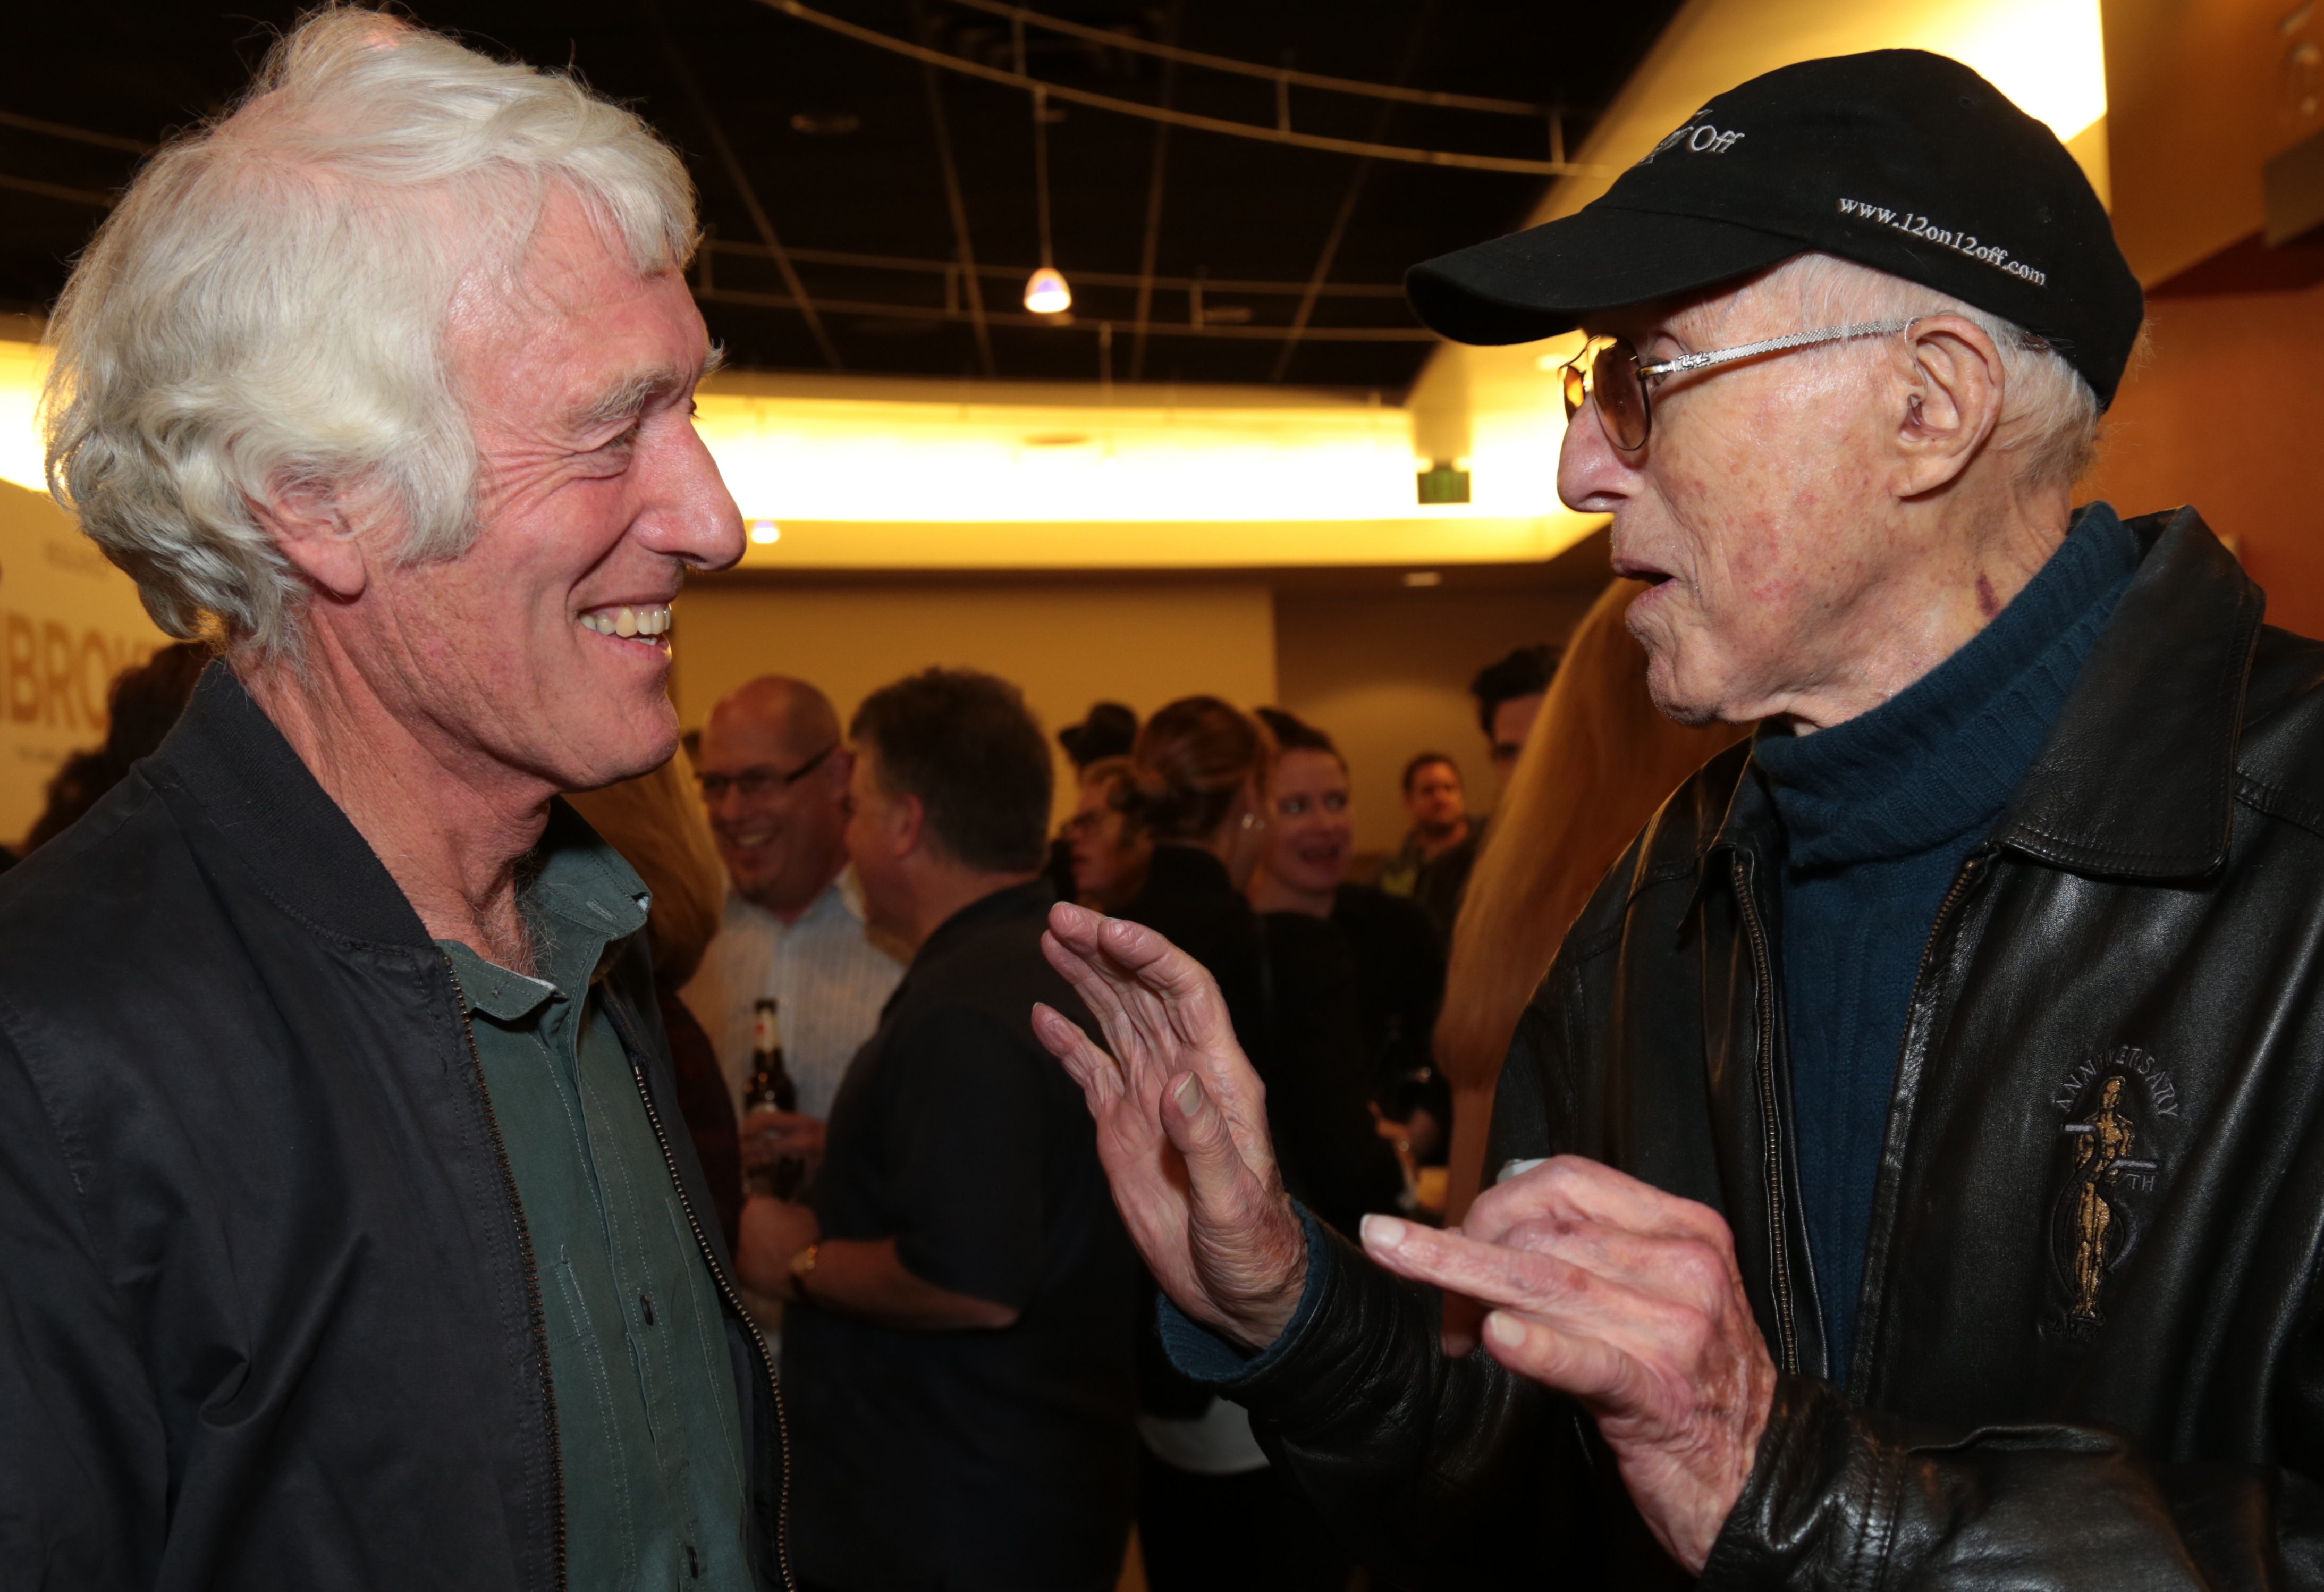 Deakins chats with Haskell Wexler, ASC.